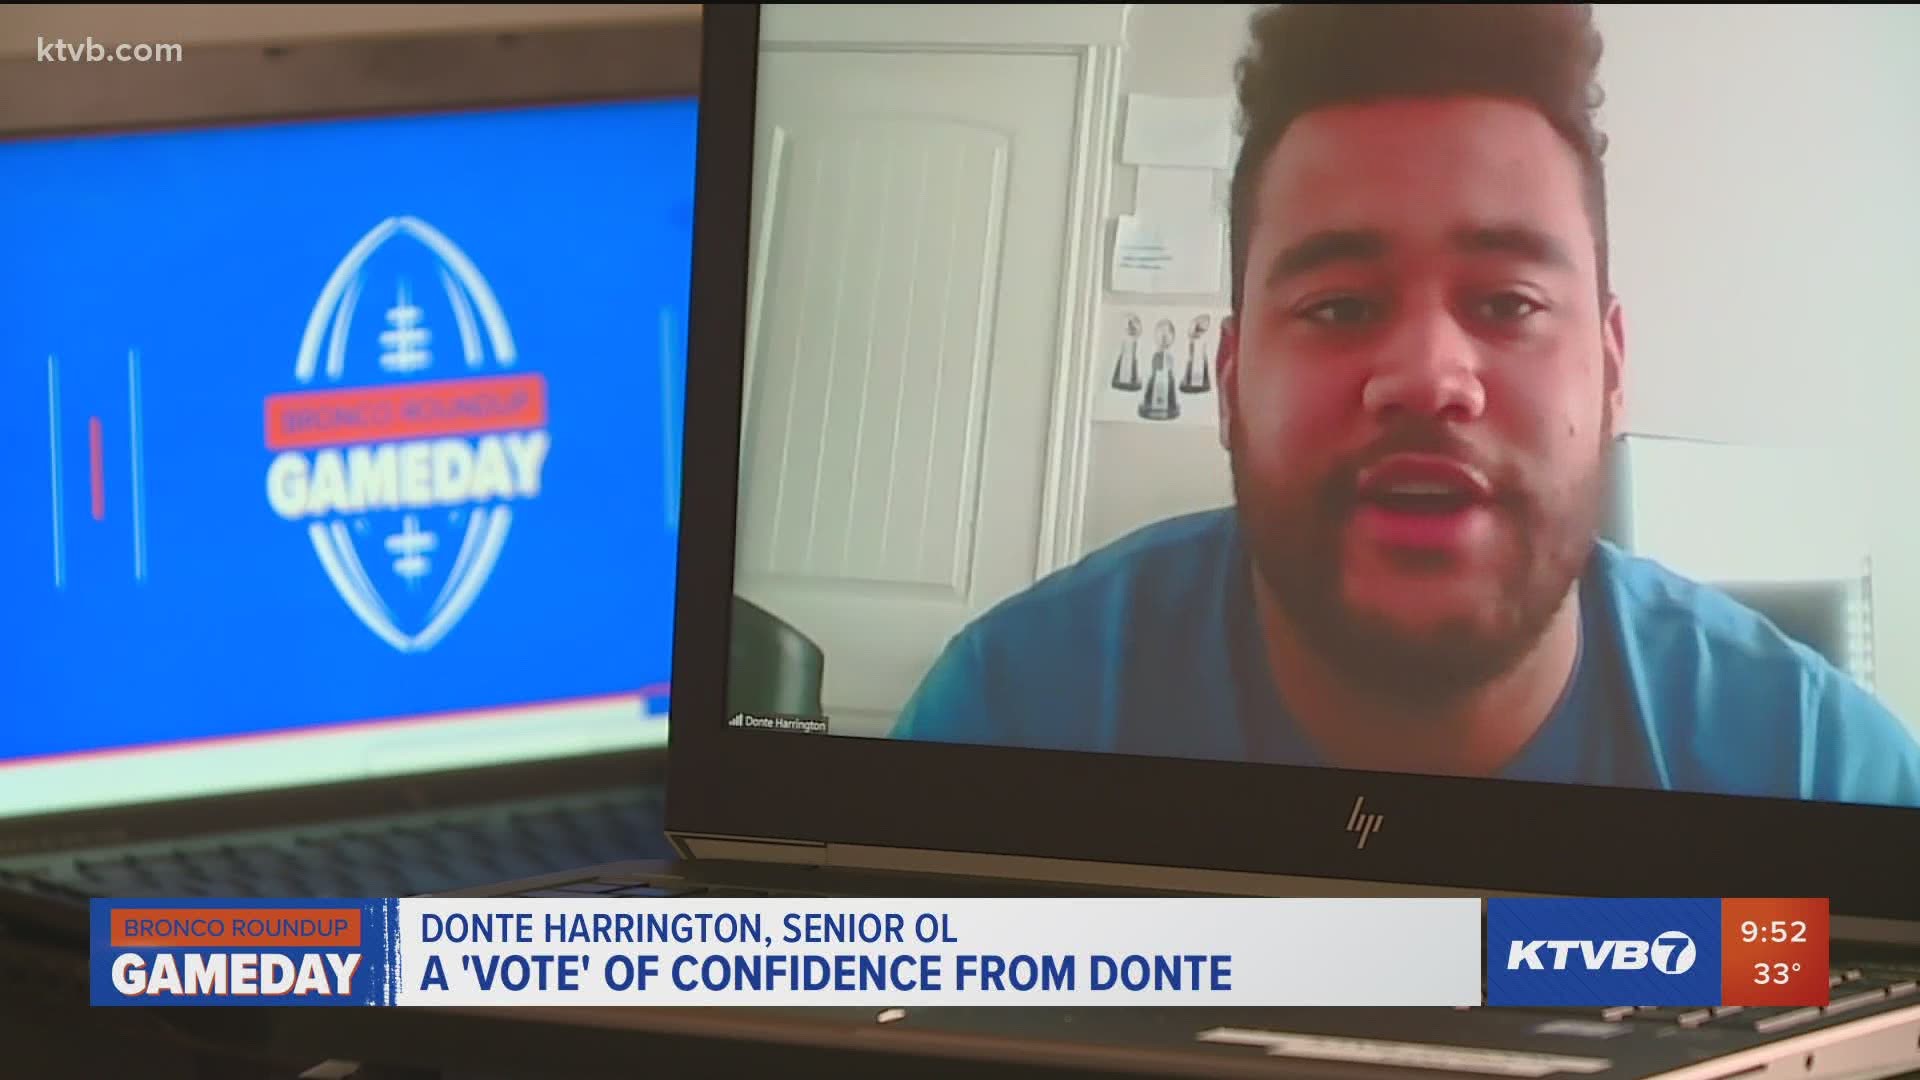 The Broncos' offensive lineman Donte Harrington realized many of his teammates didn't know where to start when it came to registering to vote.